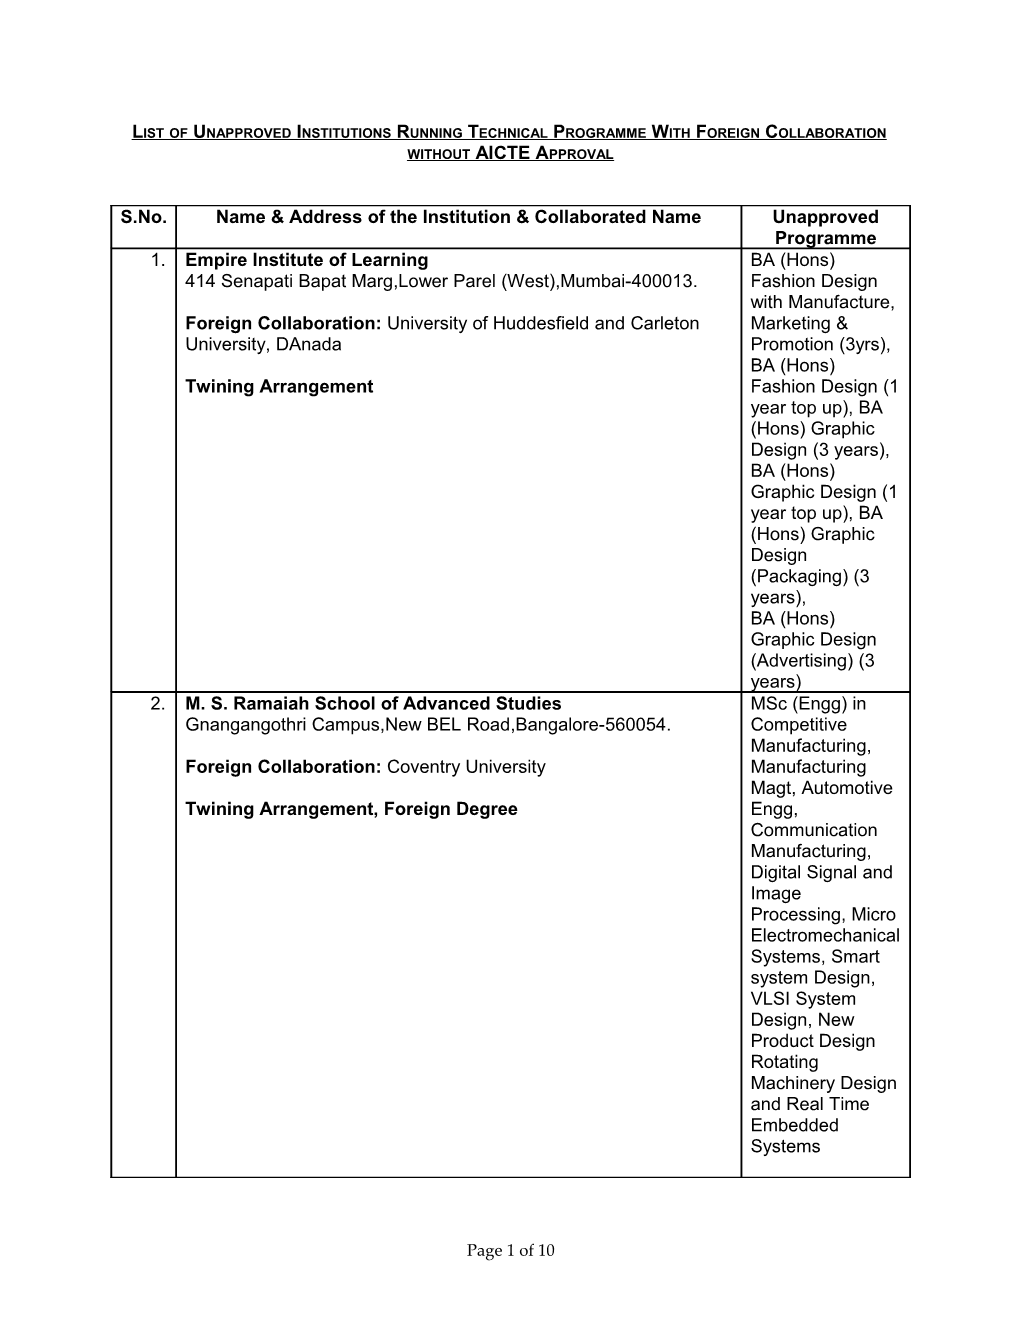 List of Unapproved Institutions Running Technical Programme with Foreign Collaboration